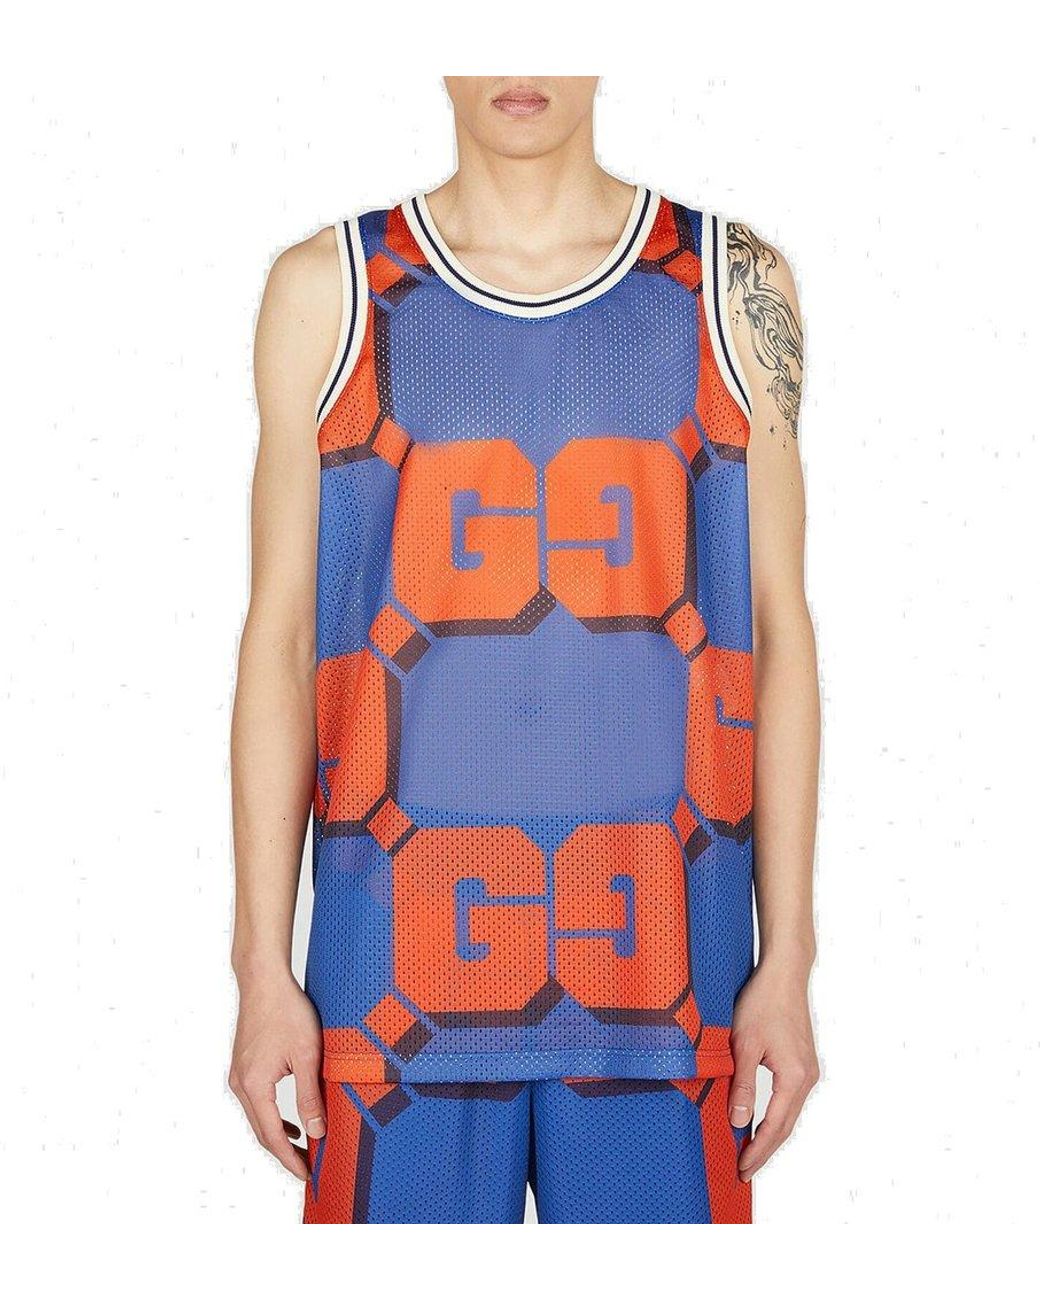 Gucci All-over GG Printed Sports Tank Top in Blue for Men